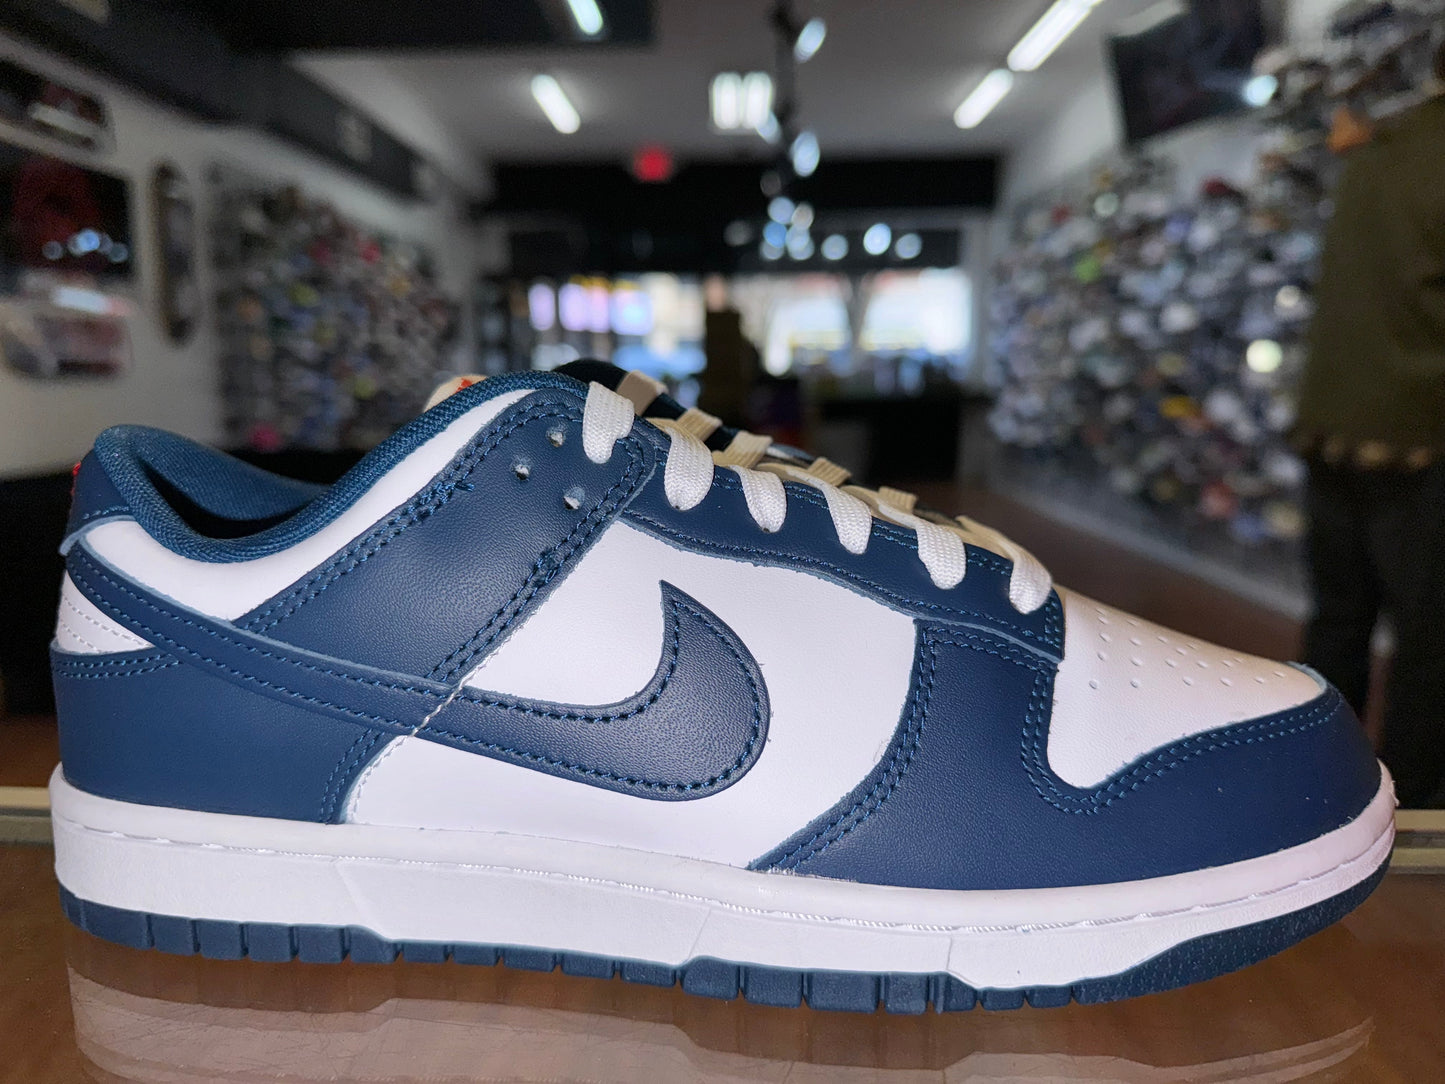 Size 8 Dunk Low "Valerian Blue" Brand New